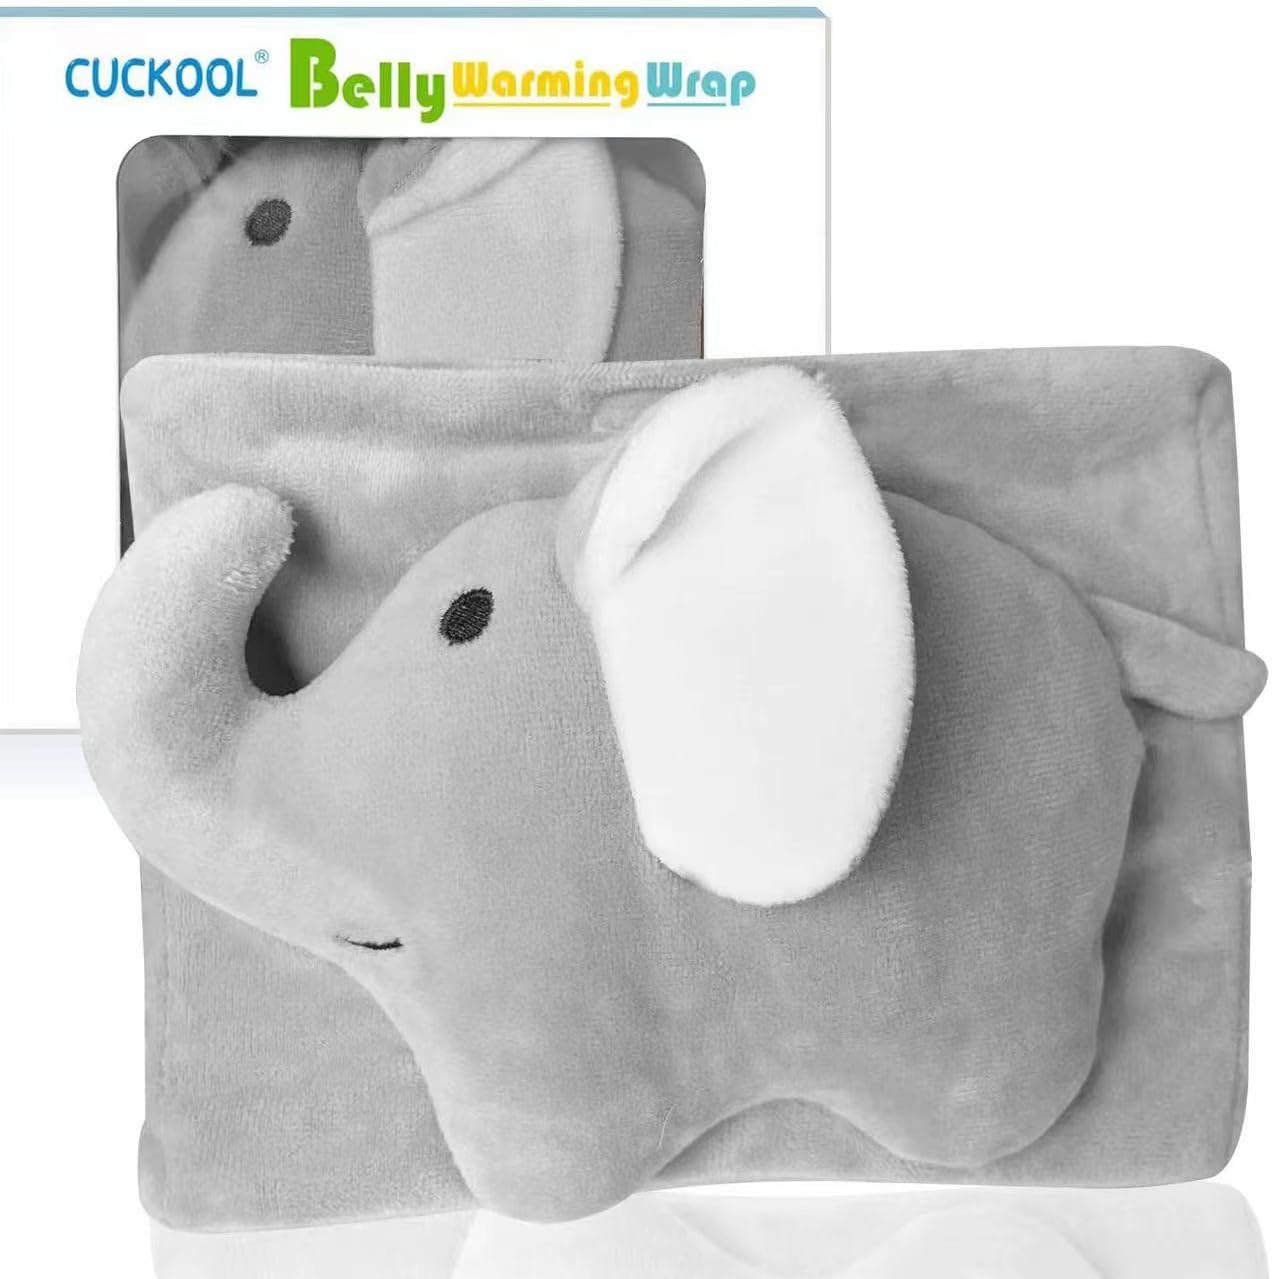 Baby Colic and Gas Relief, Heated Tummy Wrap for Newborns Belly Relief by Soothing Warmth, Baby Heating Pad Swaddling Belt Relief & Soothe Gas, Colic and Upset Stomach (Elephant)